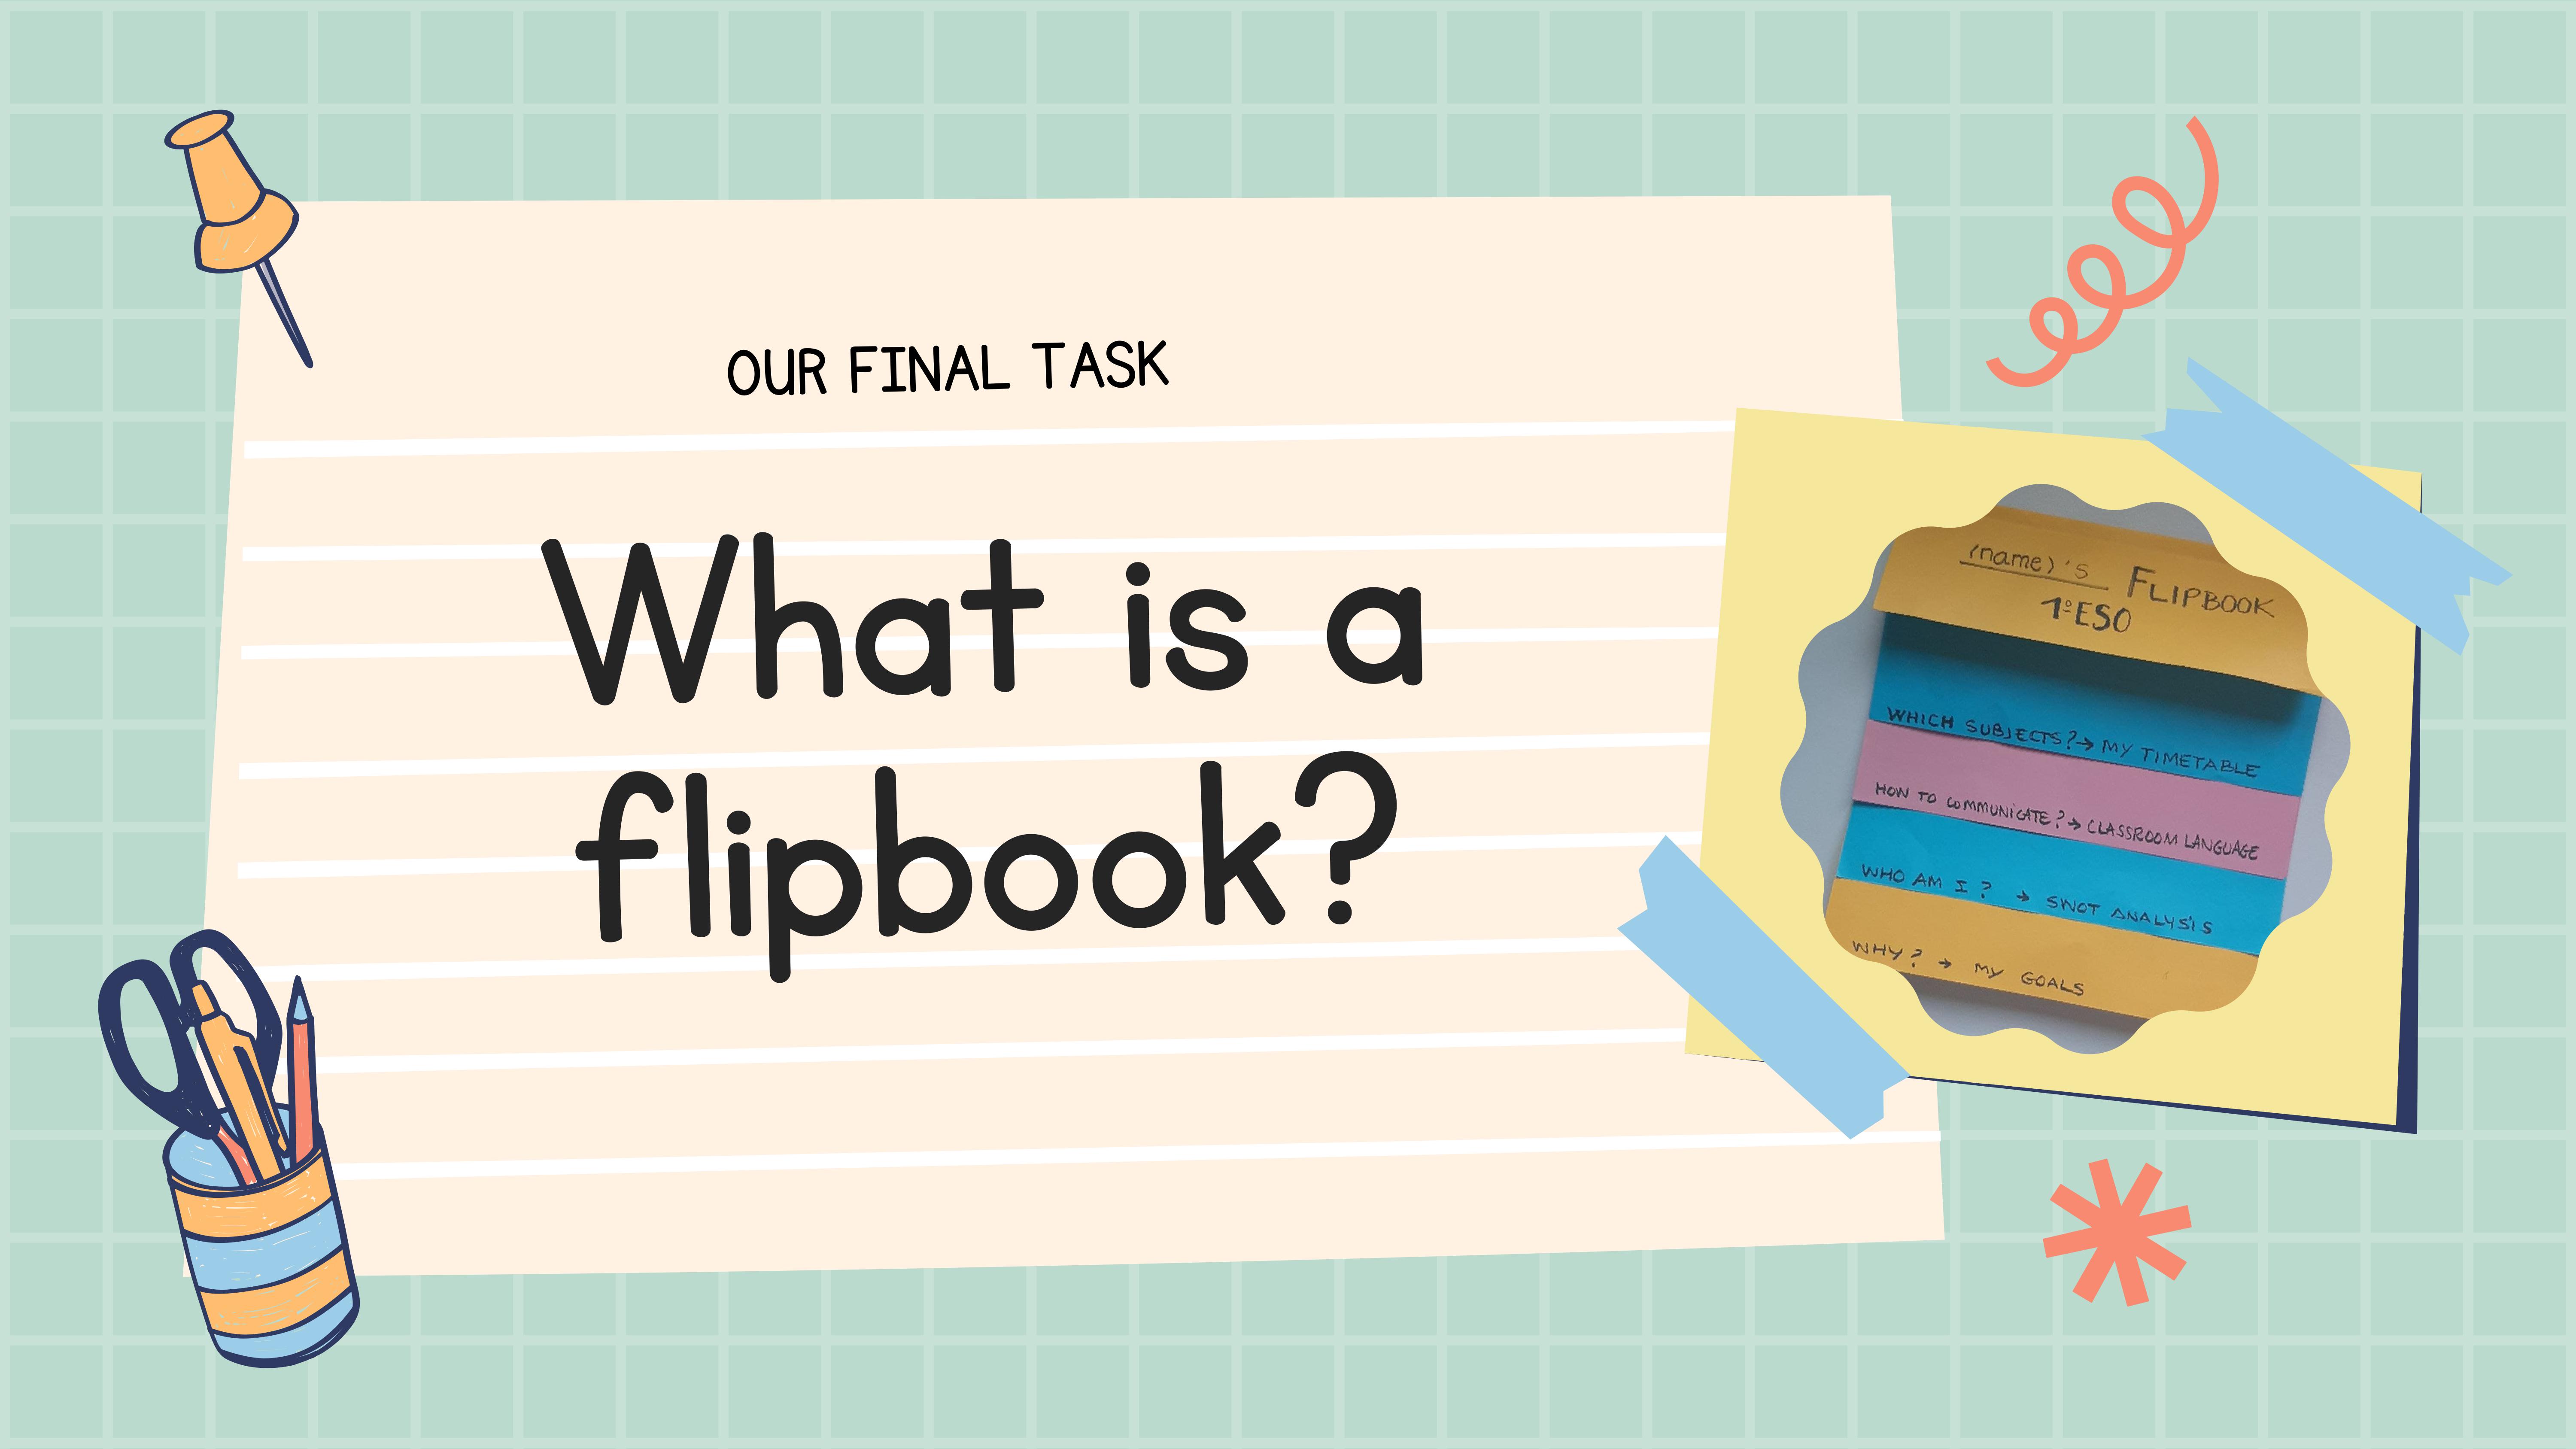 First image of the video. It can be read: what is a flipbook and it can be seen a model of flipbook.